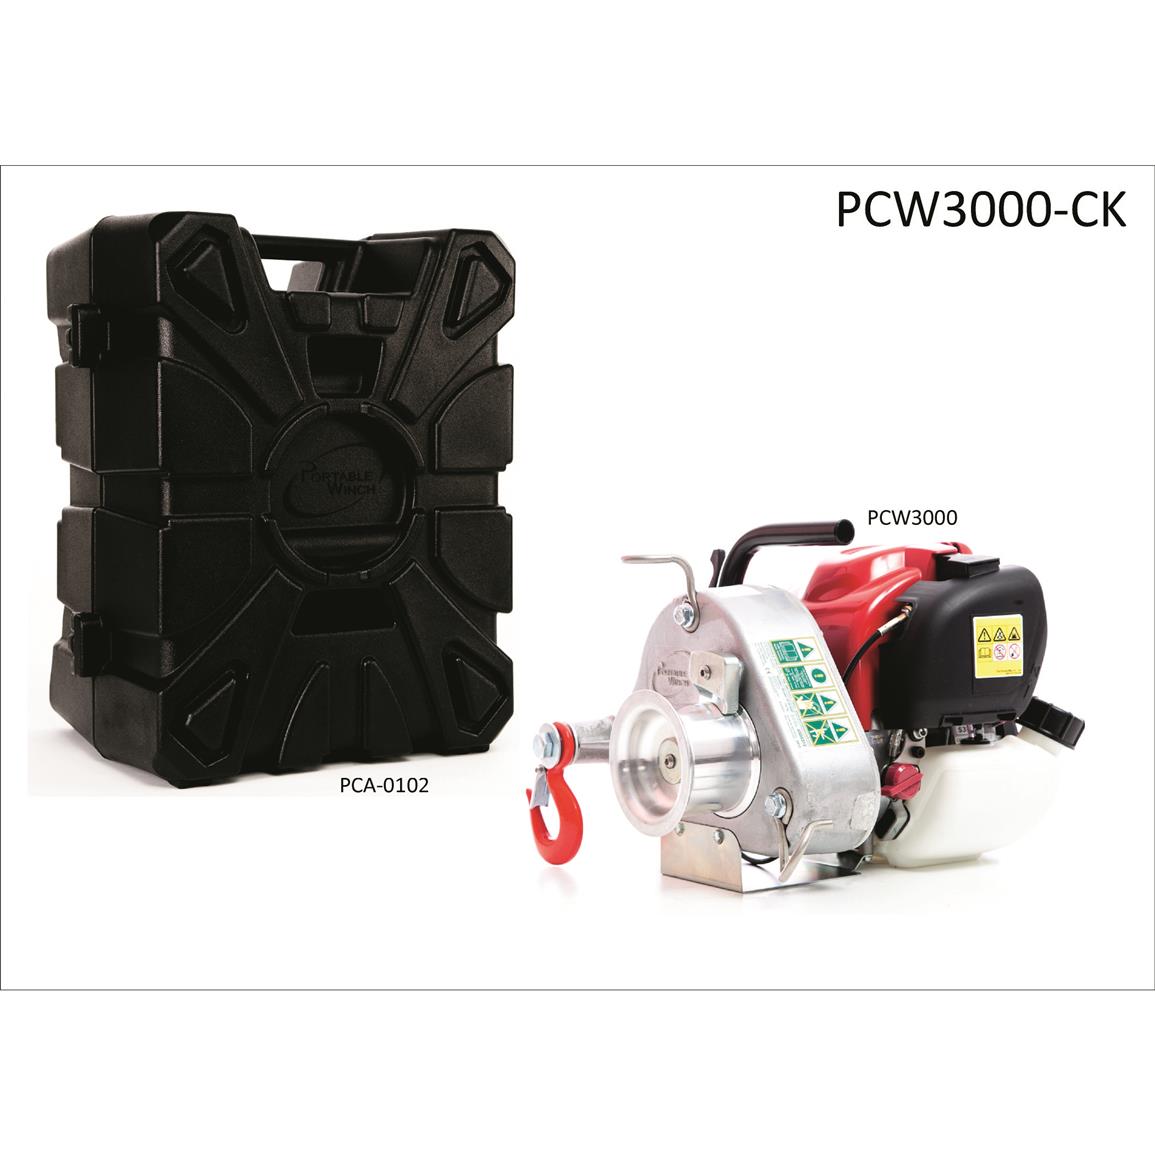 Portable Winch Co. PCW3000-CK 1500-lb. Gas-powered Portable Capstan Winch with Transport Case